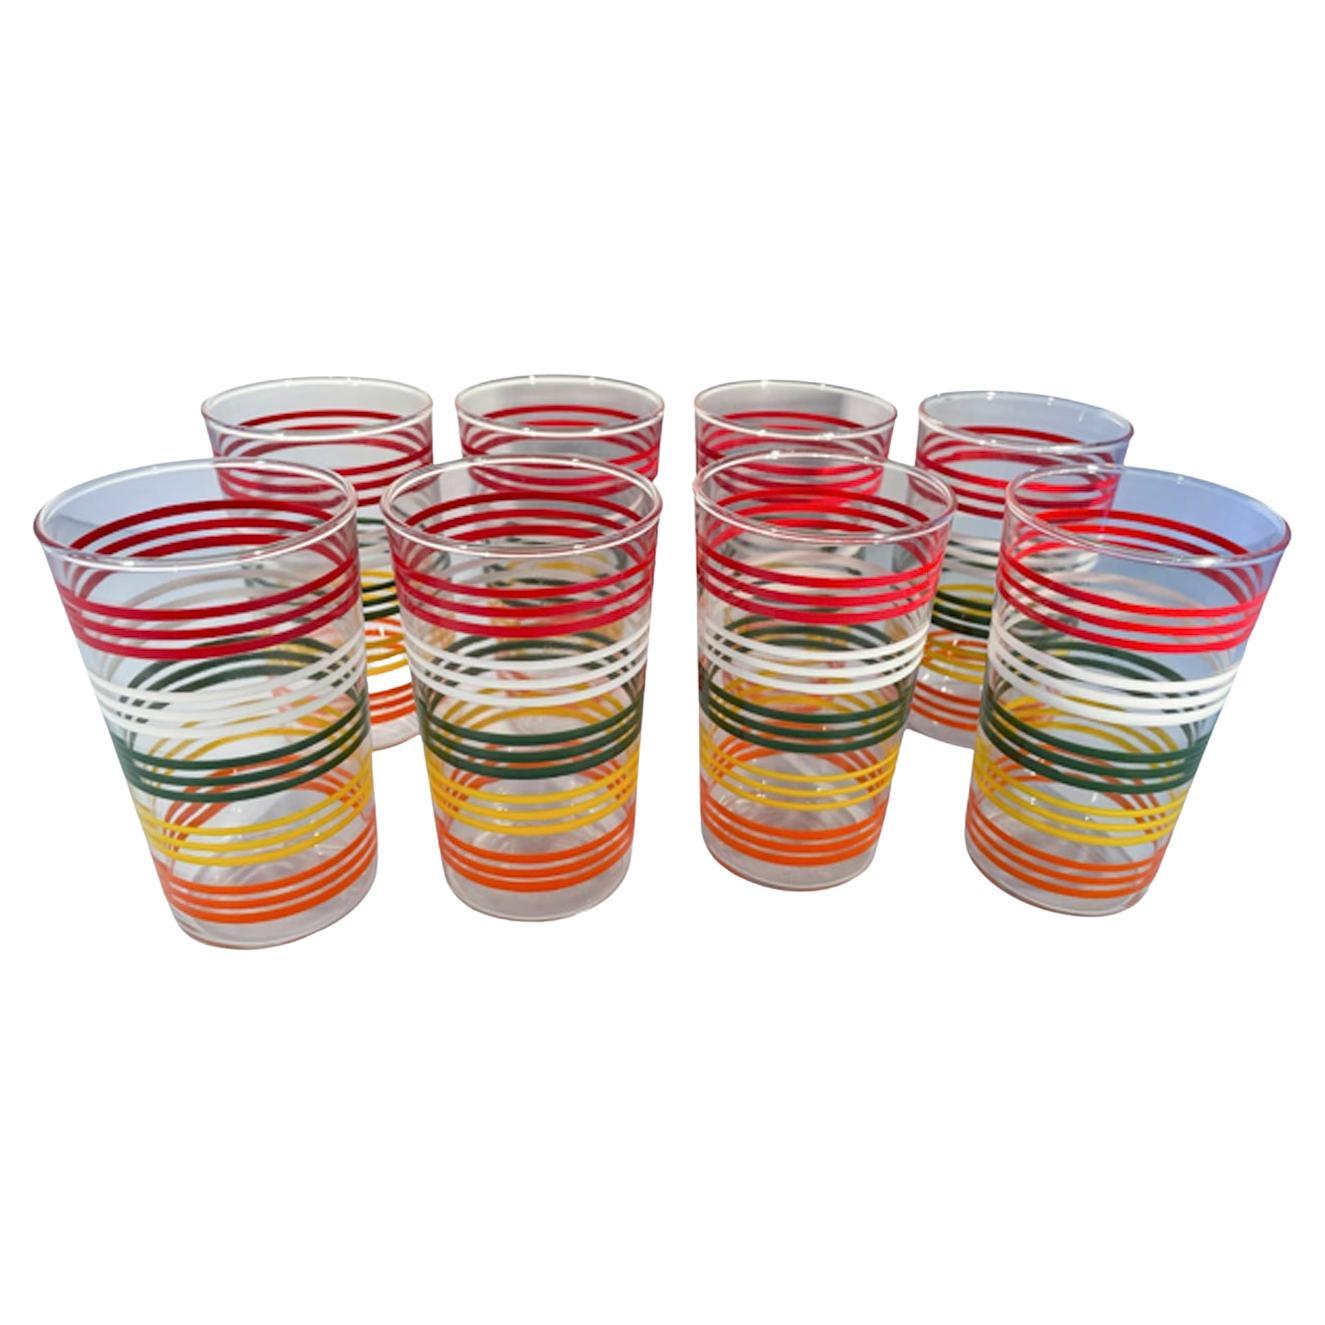 Eight Midcentury Highball Glasses W/Bands of Brightly Colored Lines